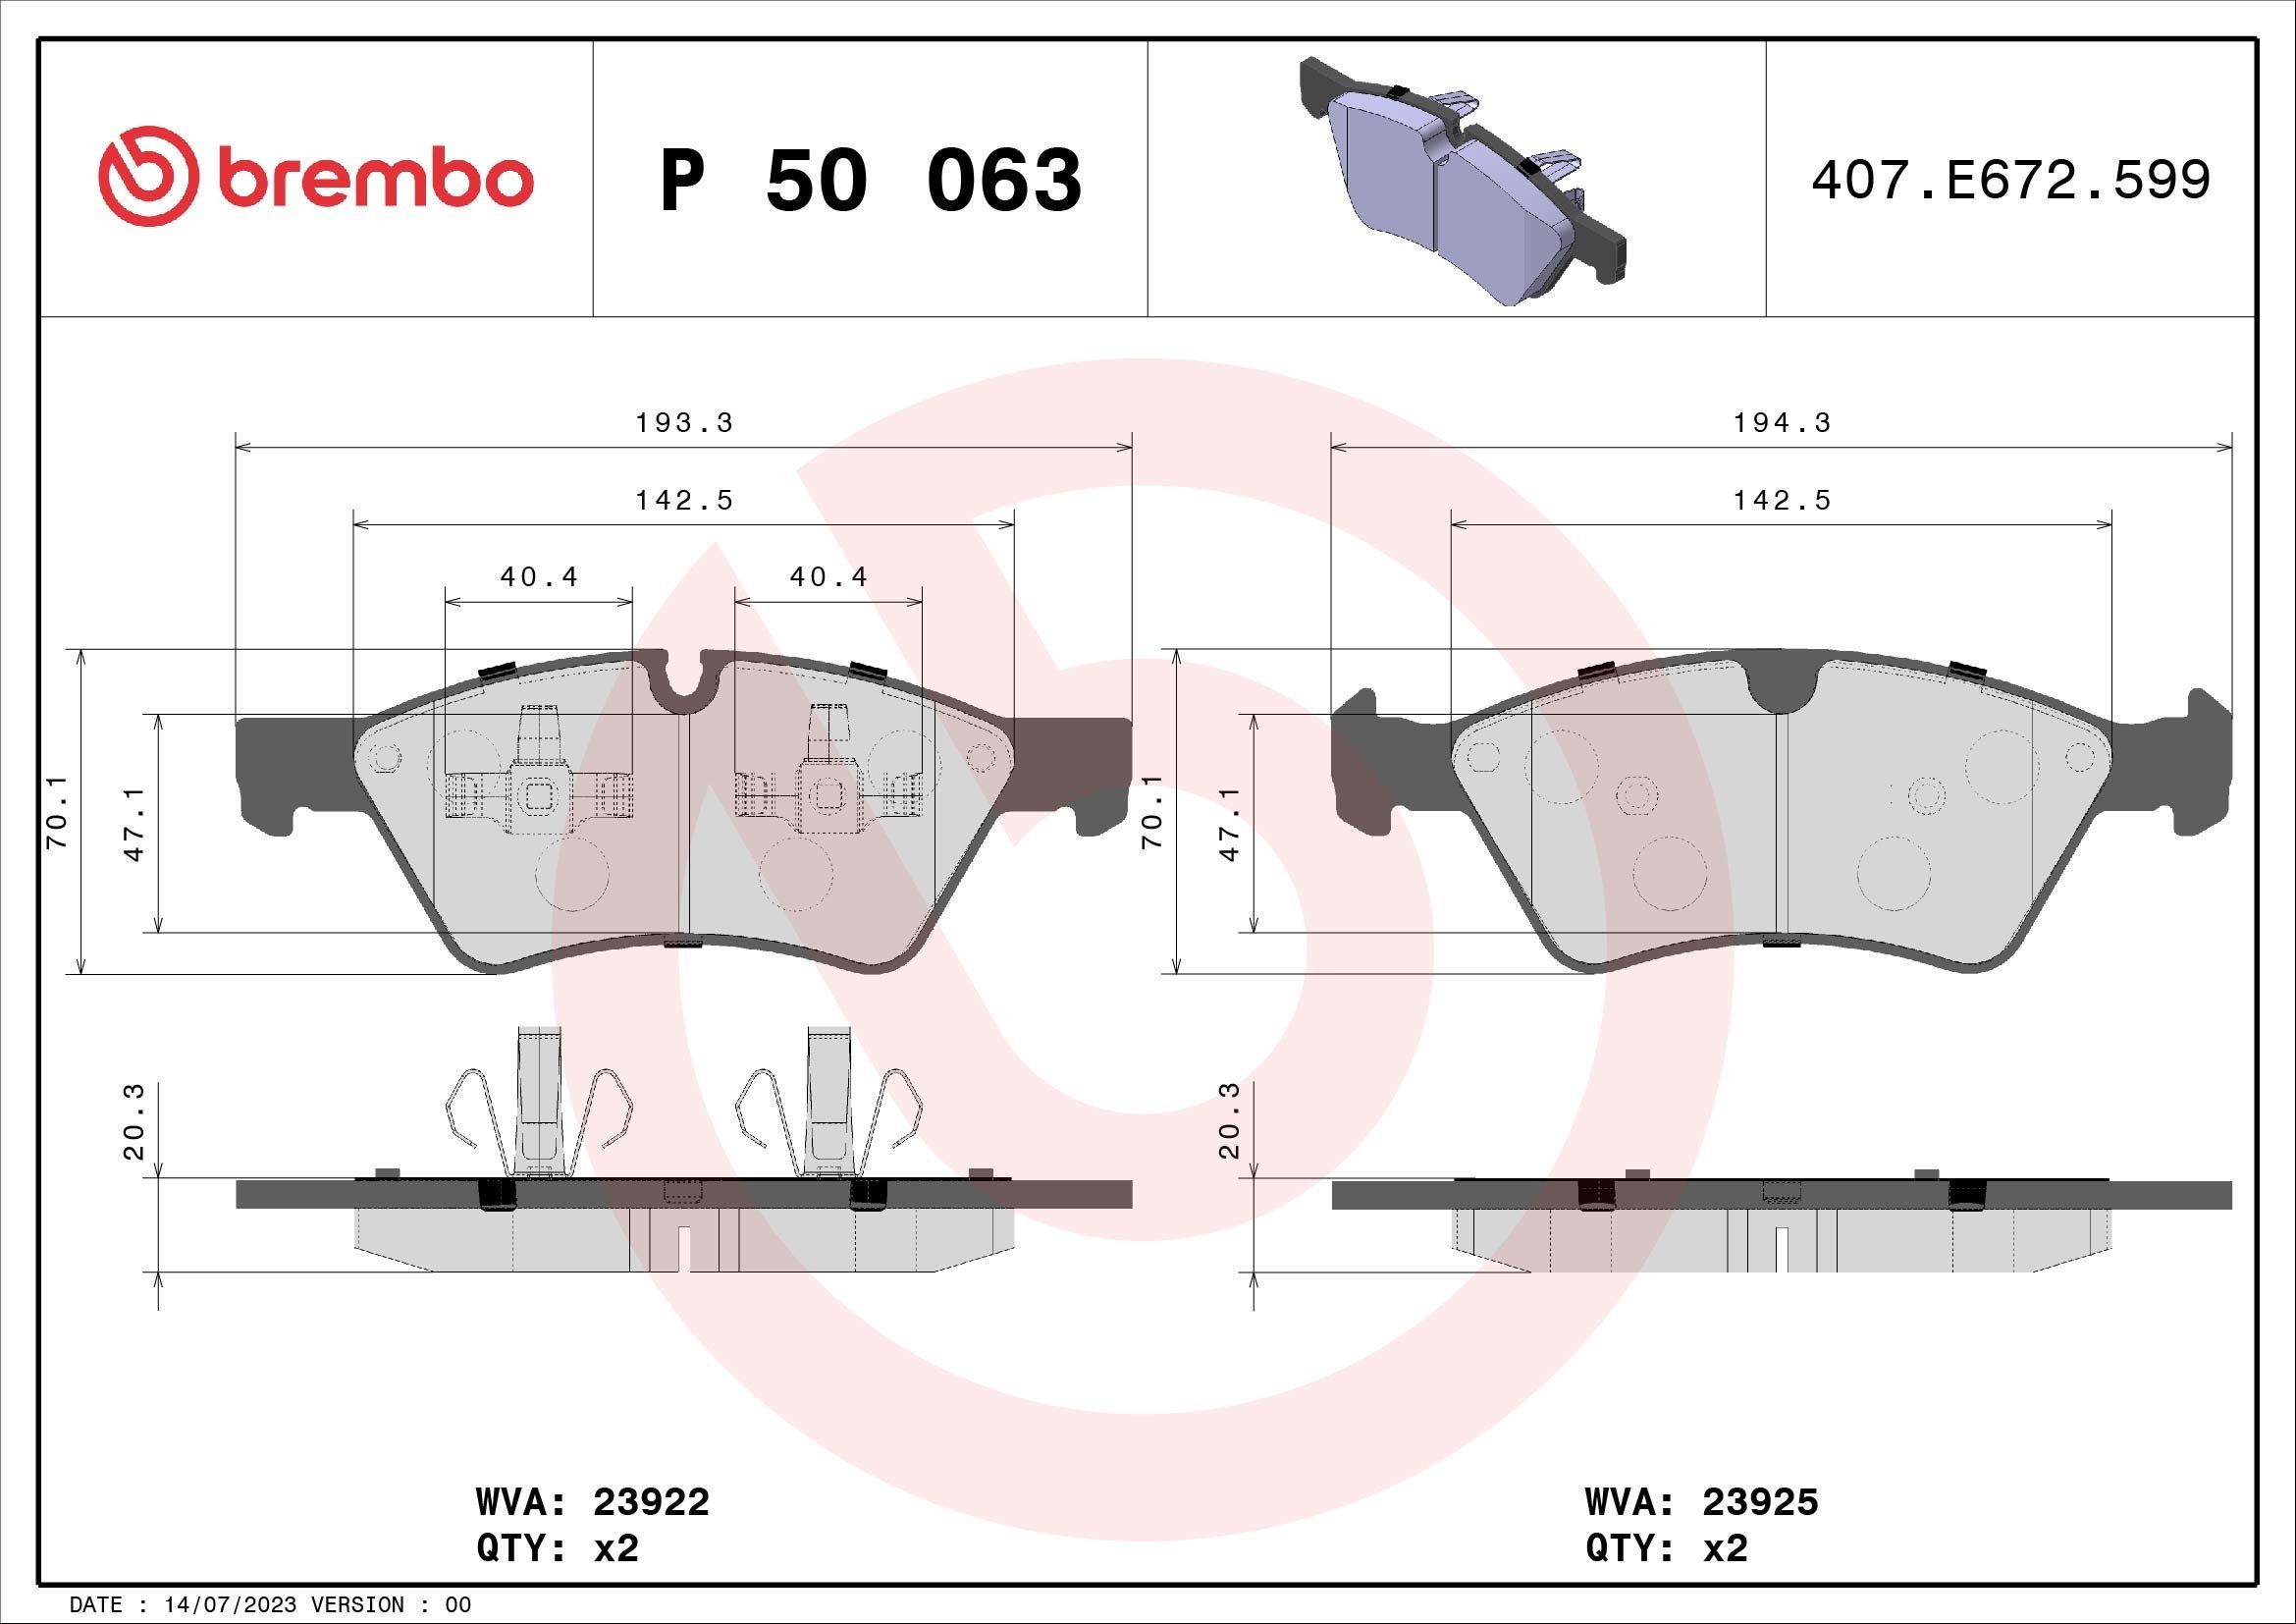 P50063 Set of brake pads D1123 8229 BREMBO prepared for wear indicator, with piston clip, without accessories